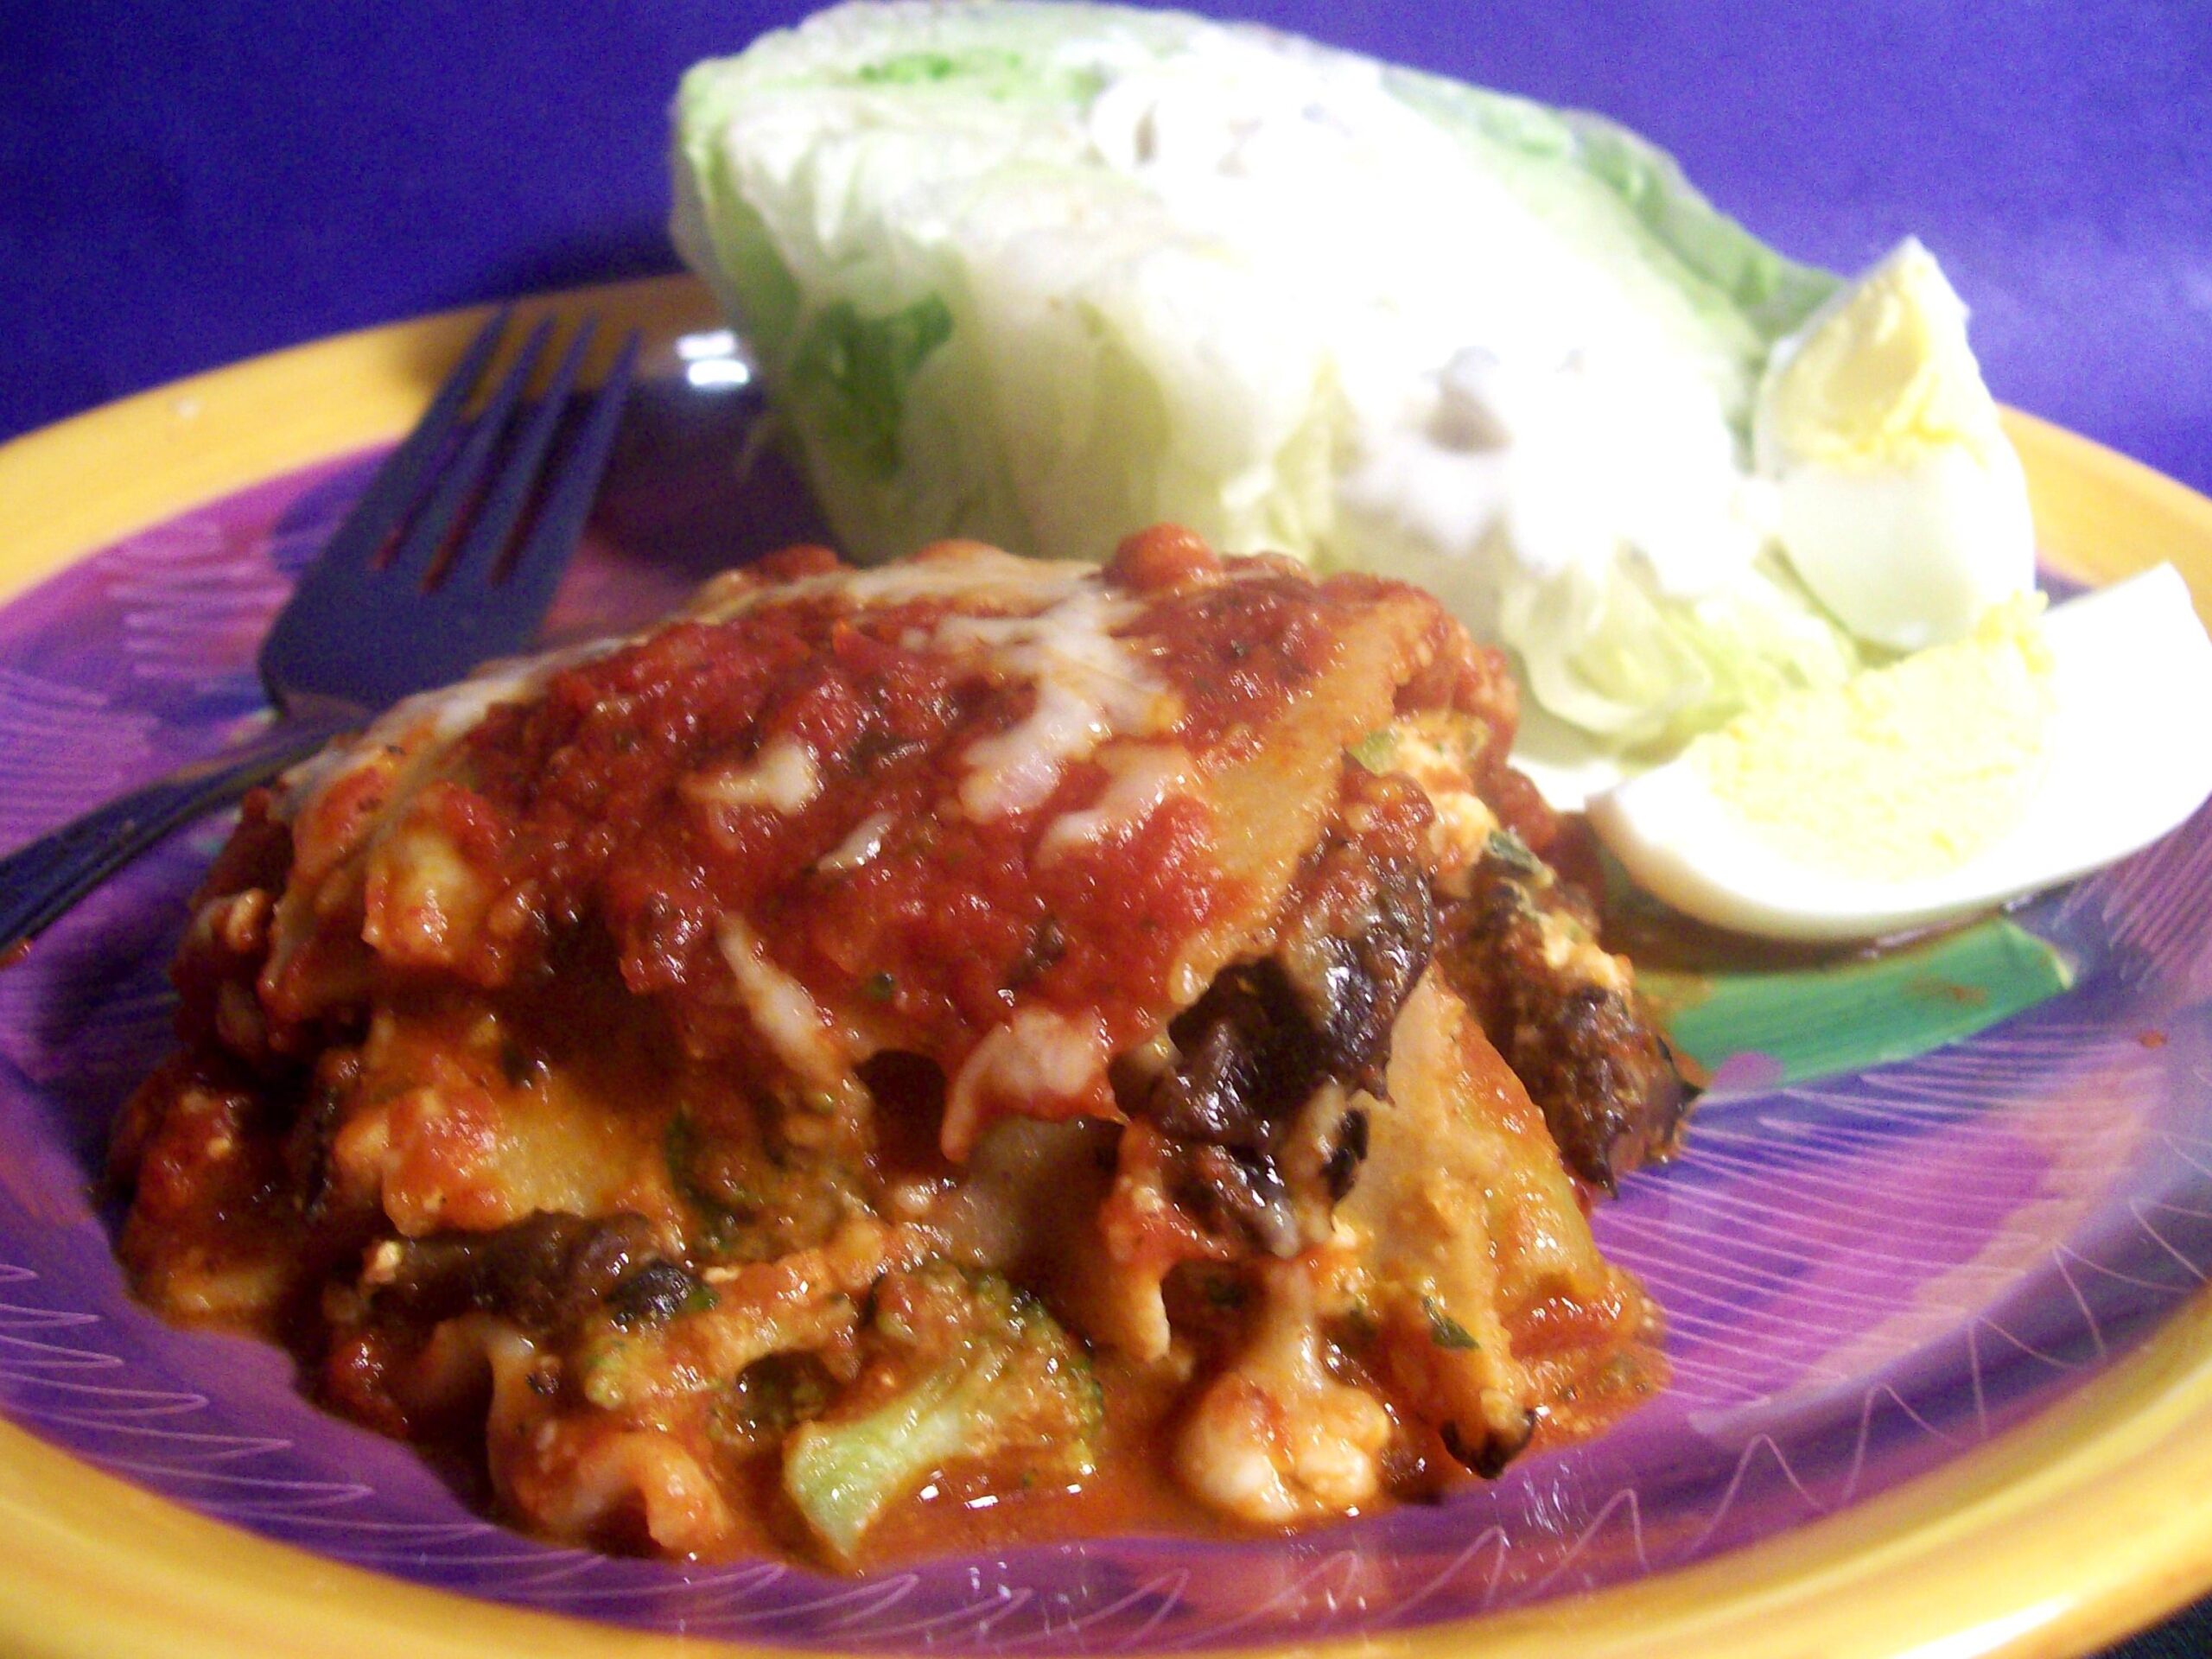  Save room for seconds! This lasagna is sure to impress even the pickiest eaters.